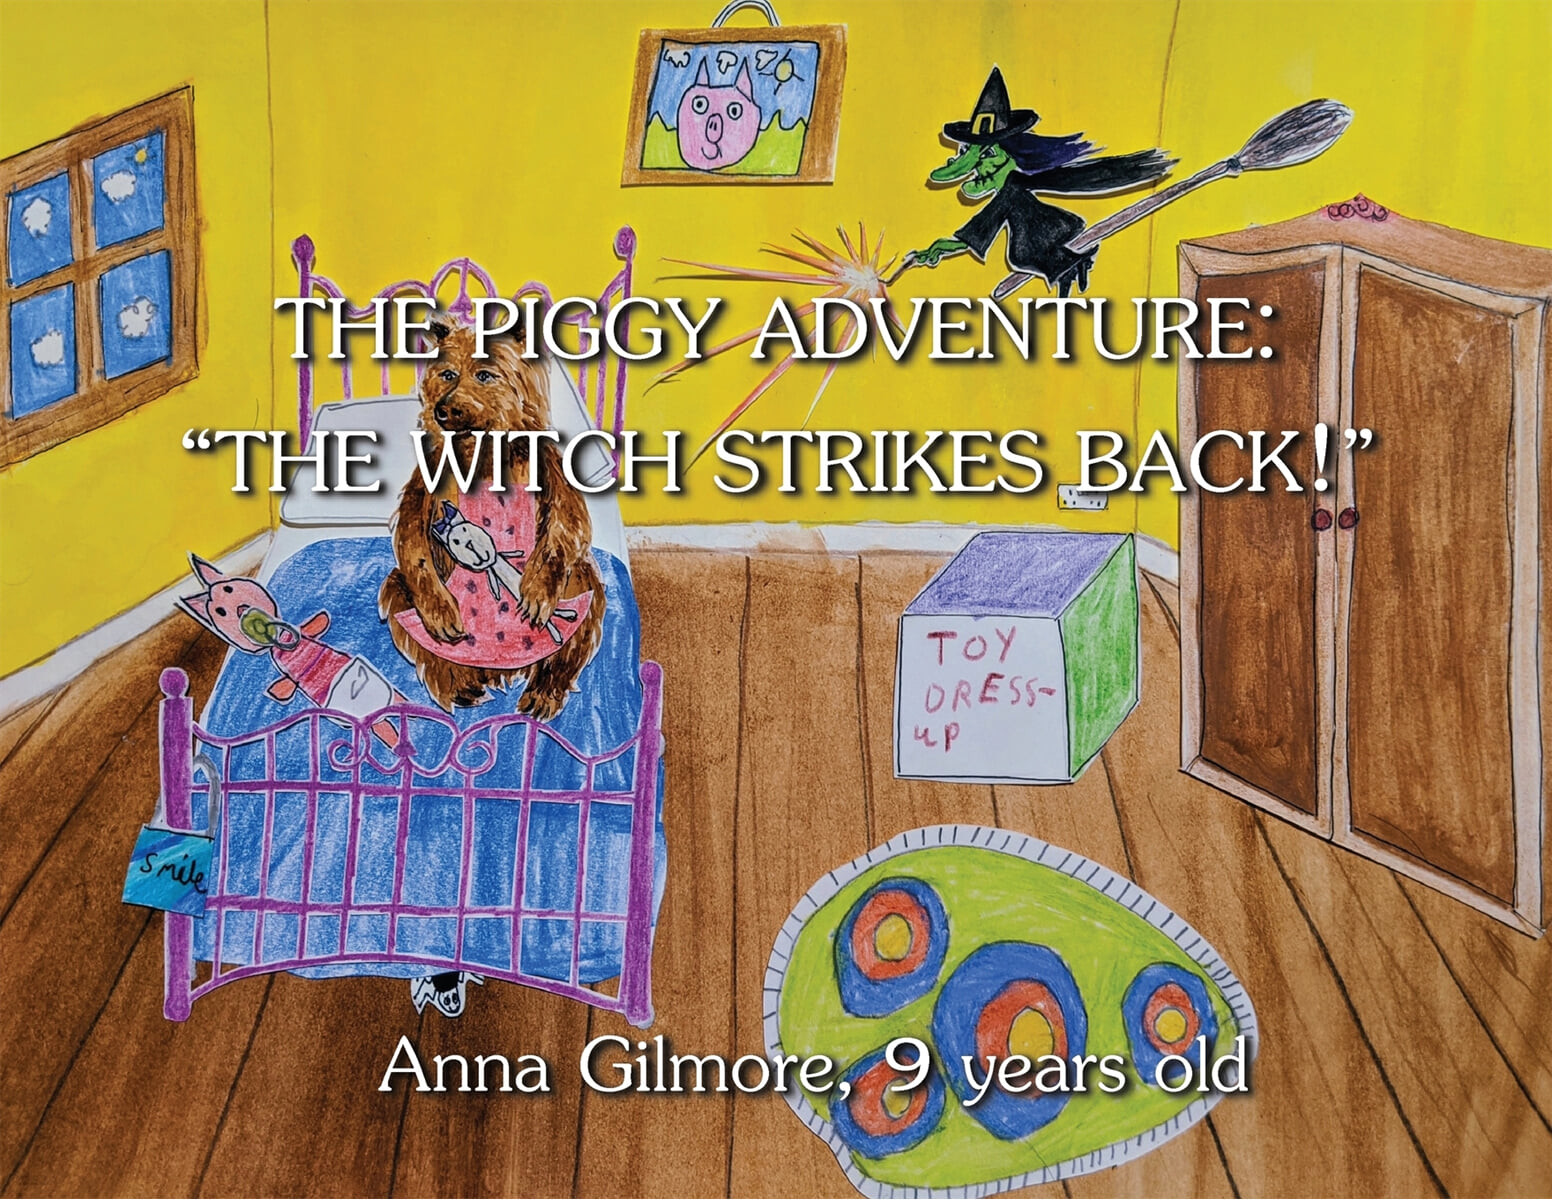 The Piggy Adventure: The Witch Strikes Back!